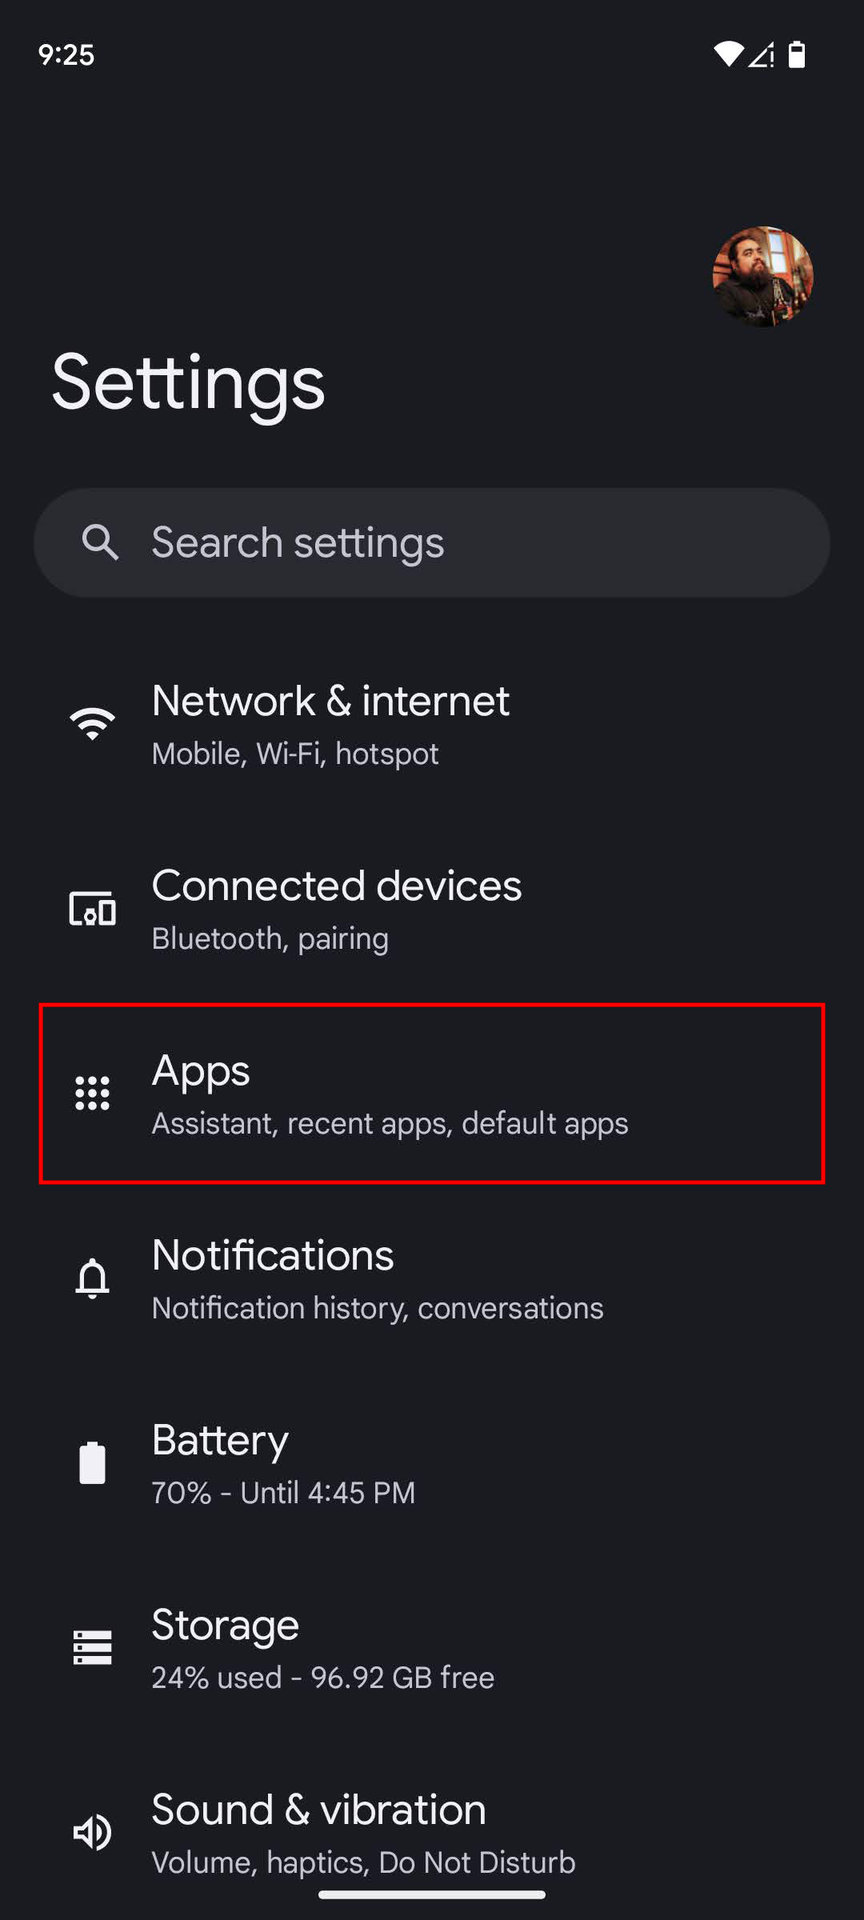 How to turn the microphone permission on or off for specific apps (1)